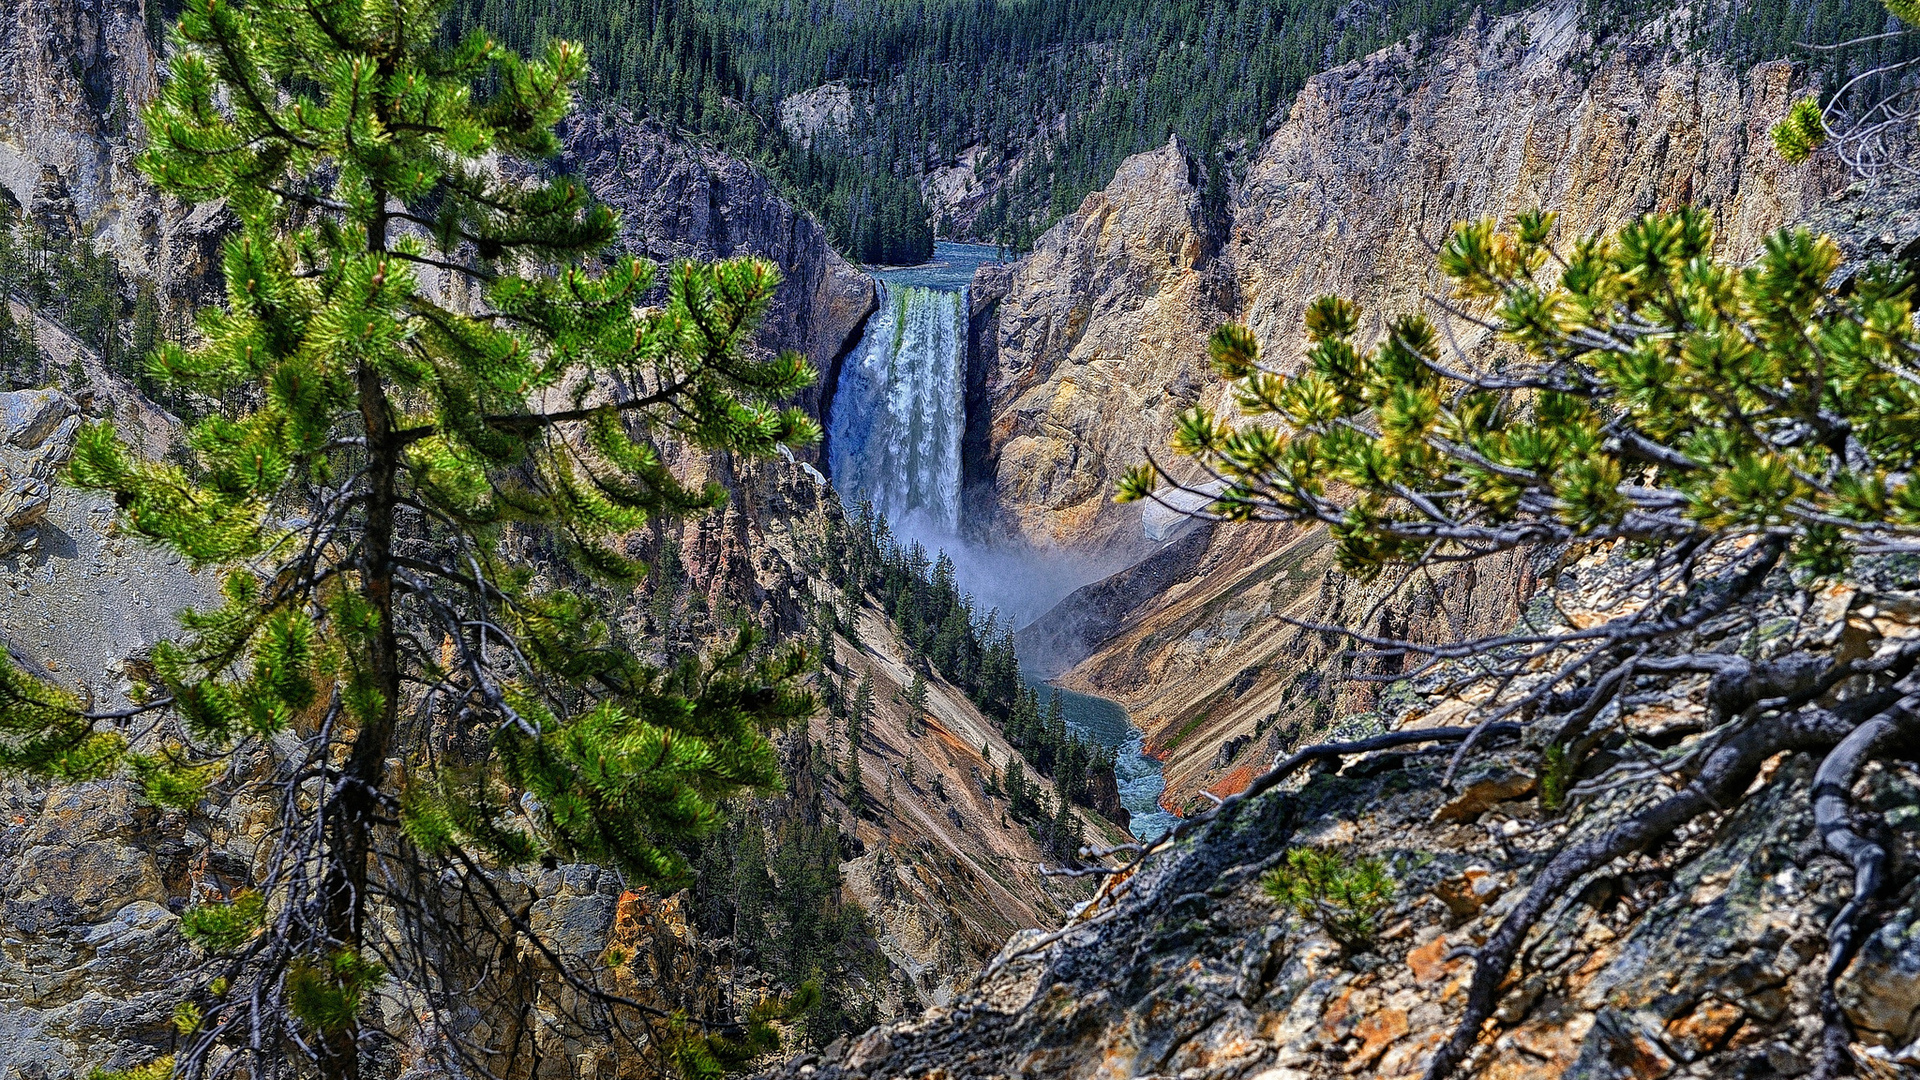 Earth Waterfall Rock Mountain Forest River Yellowstone 1920x1080